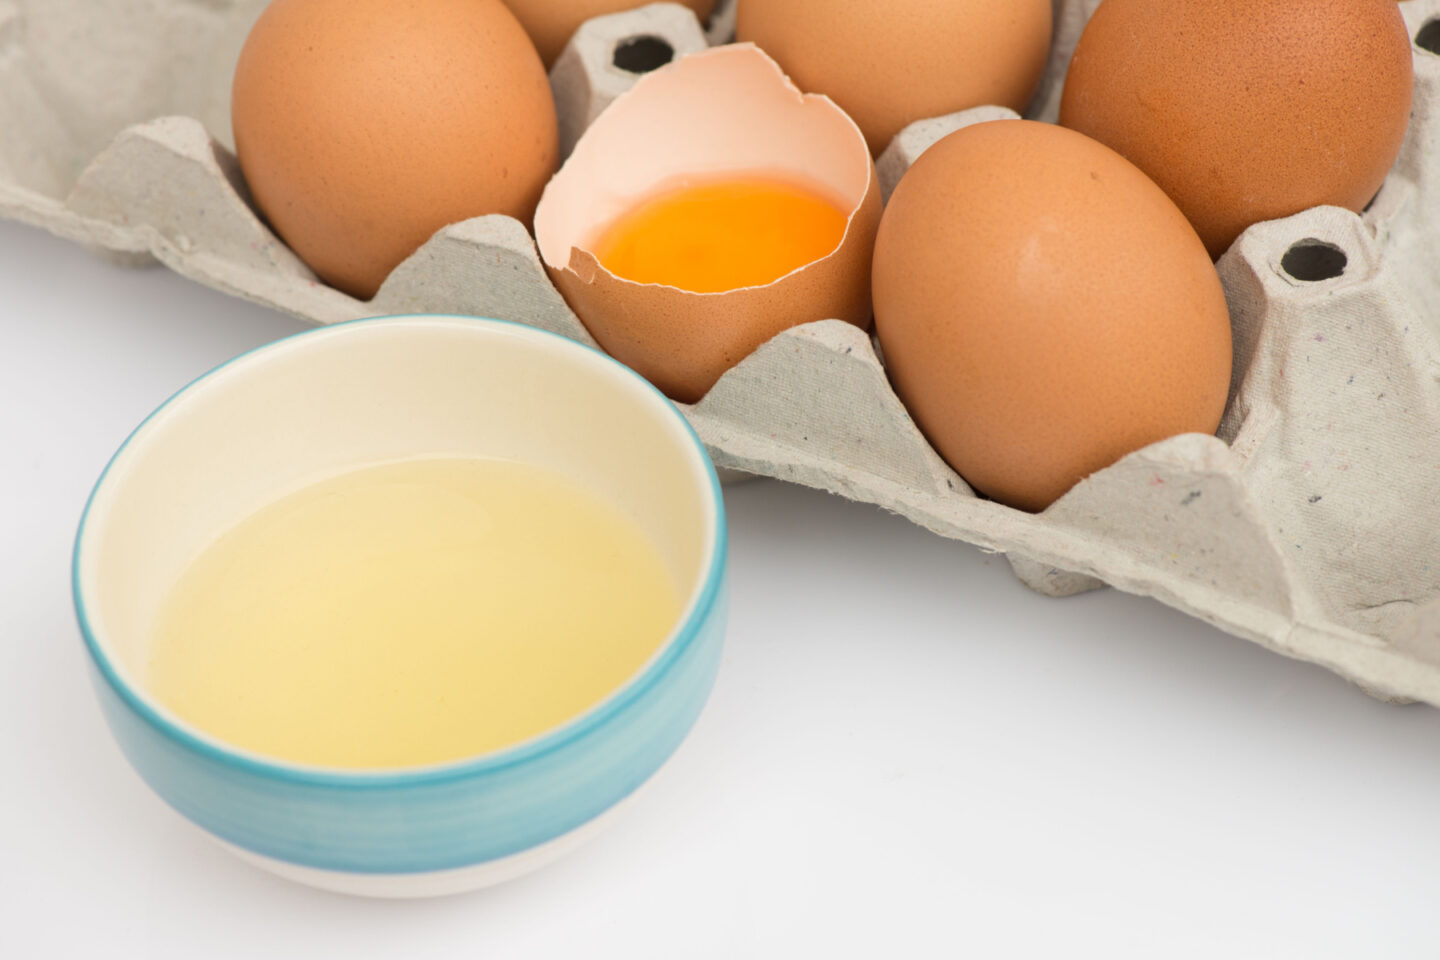 egg whites in a bowl with fresh eggs in a tray